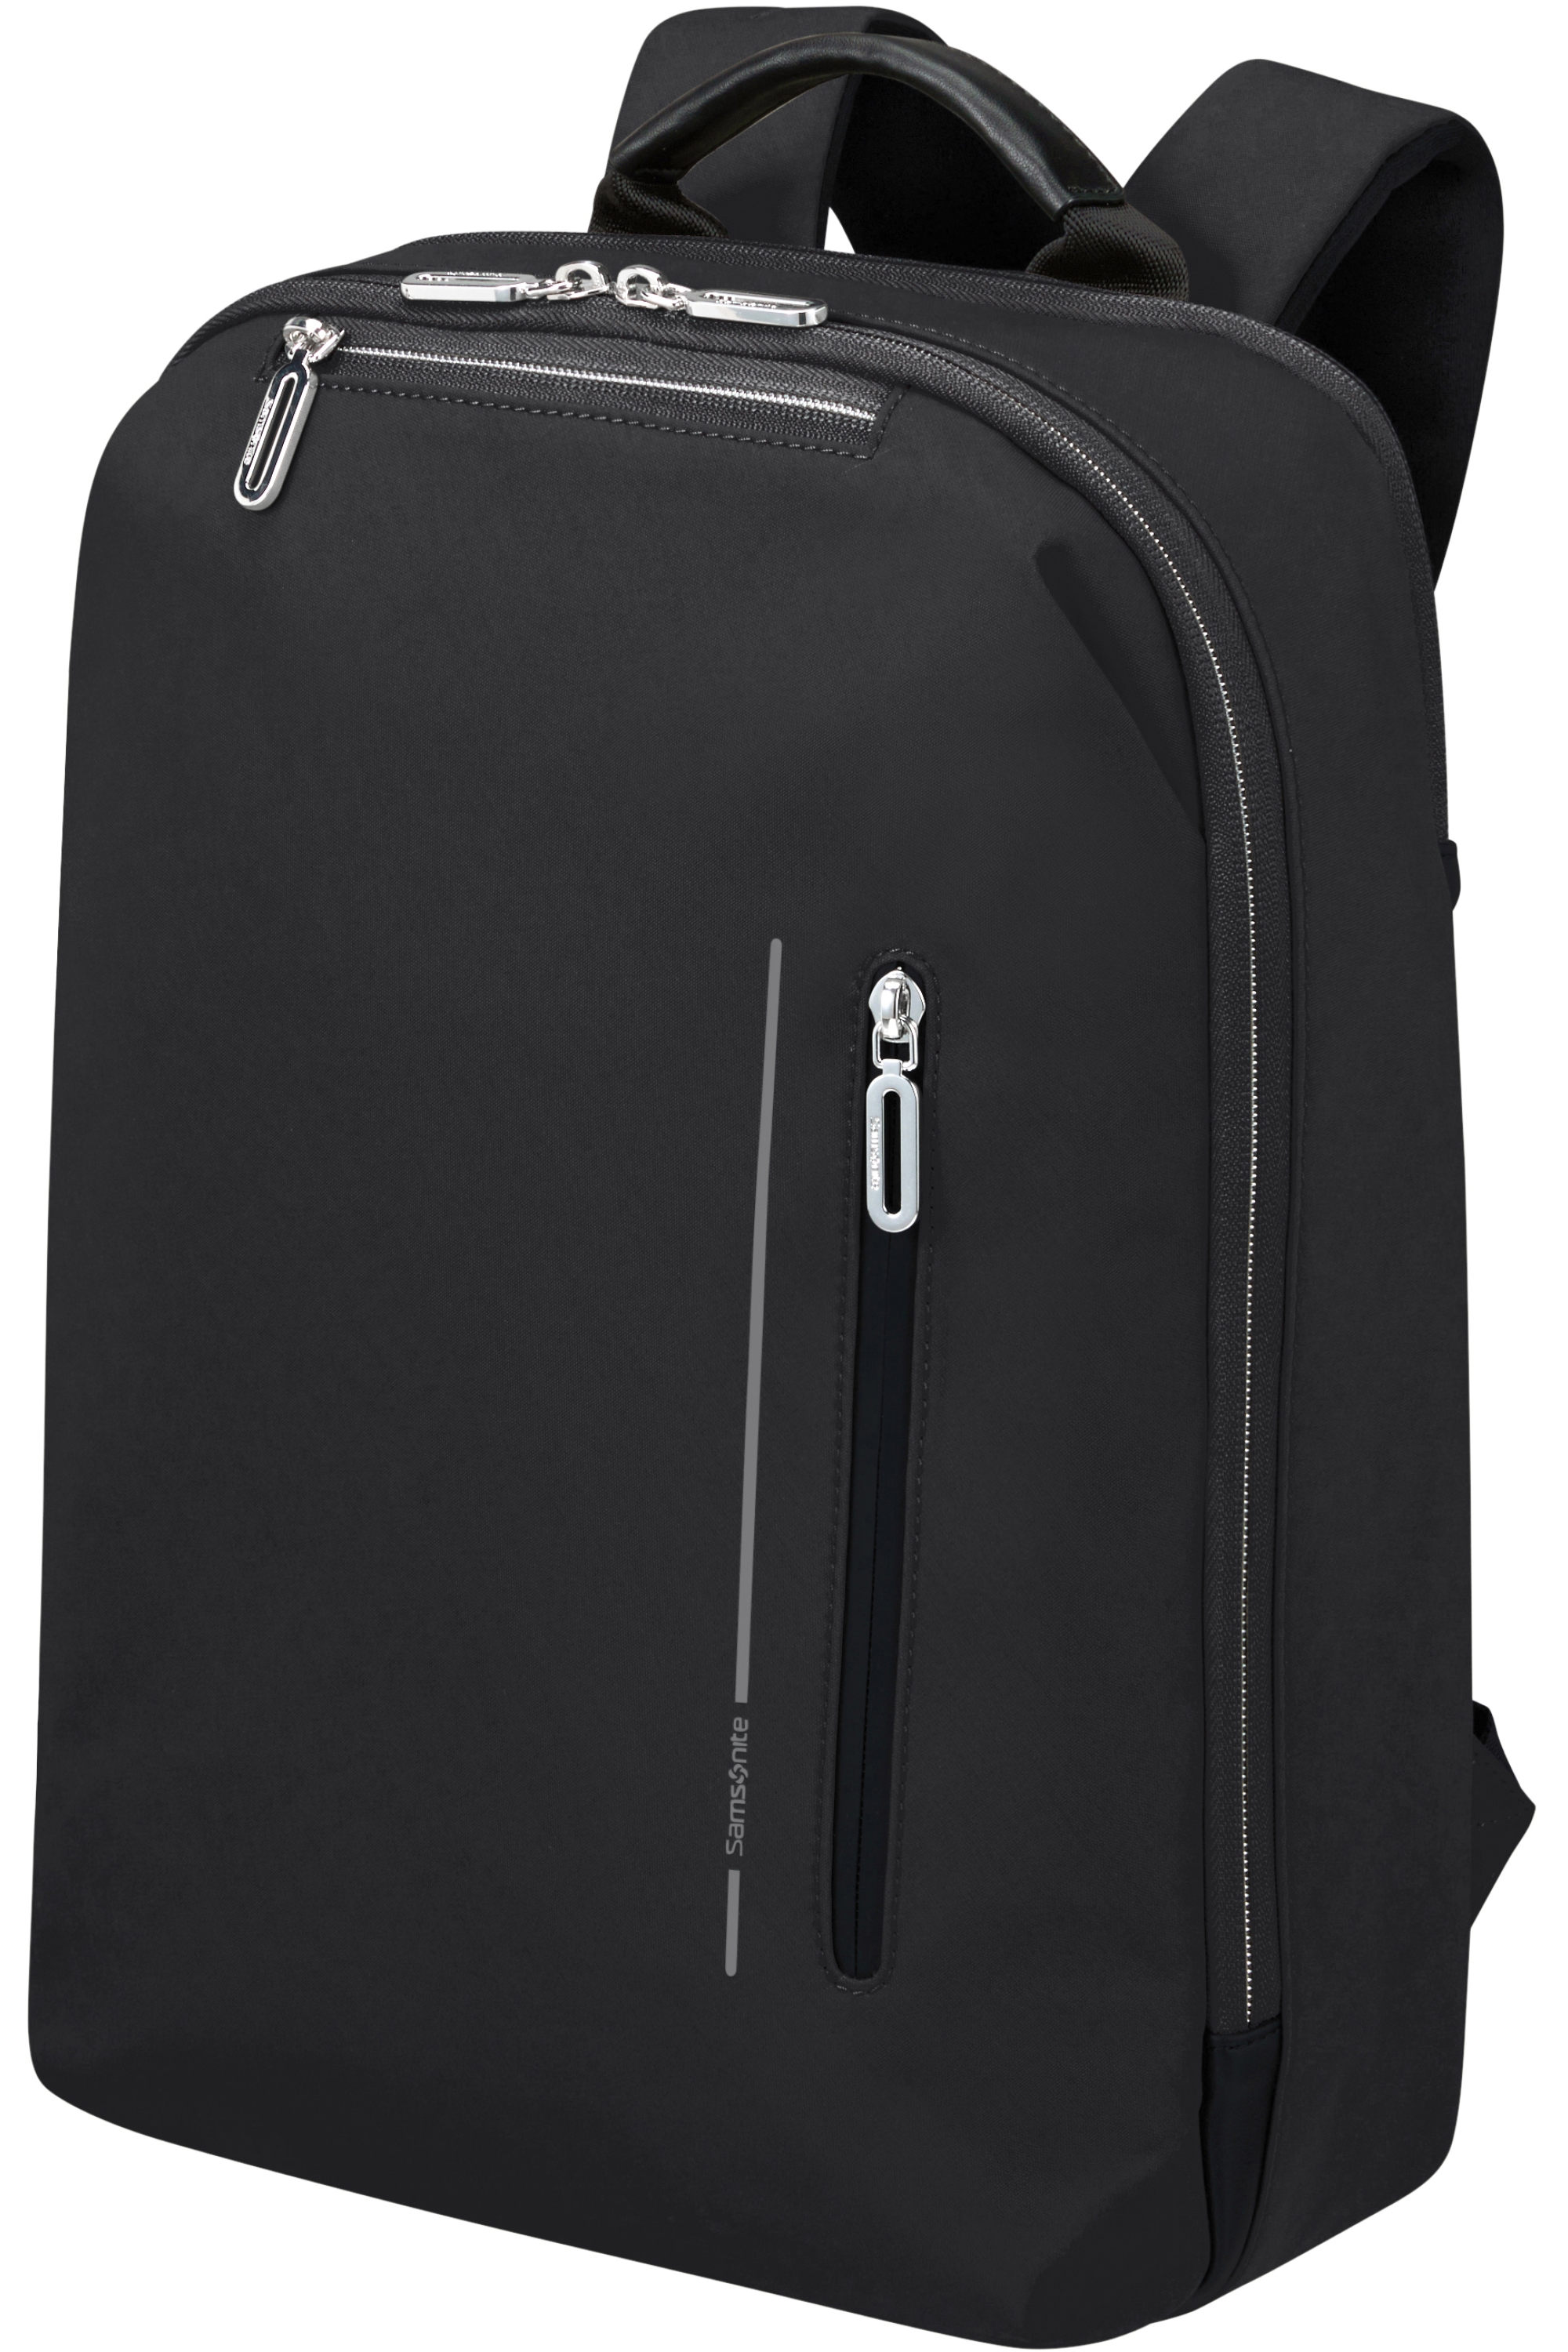 144758-1041-144758_1041_ongoing_backpack_14-1_front34-fc26c2db-bb69-4df8-a85f-af070089a9b2-jpg